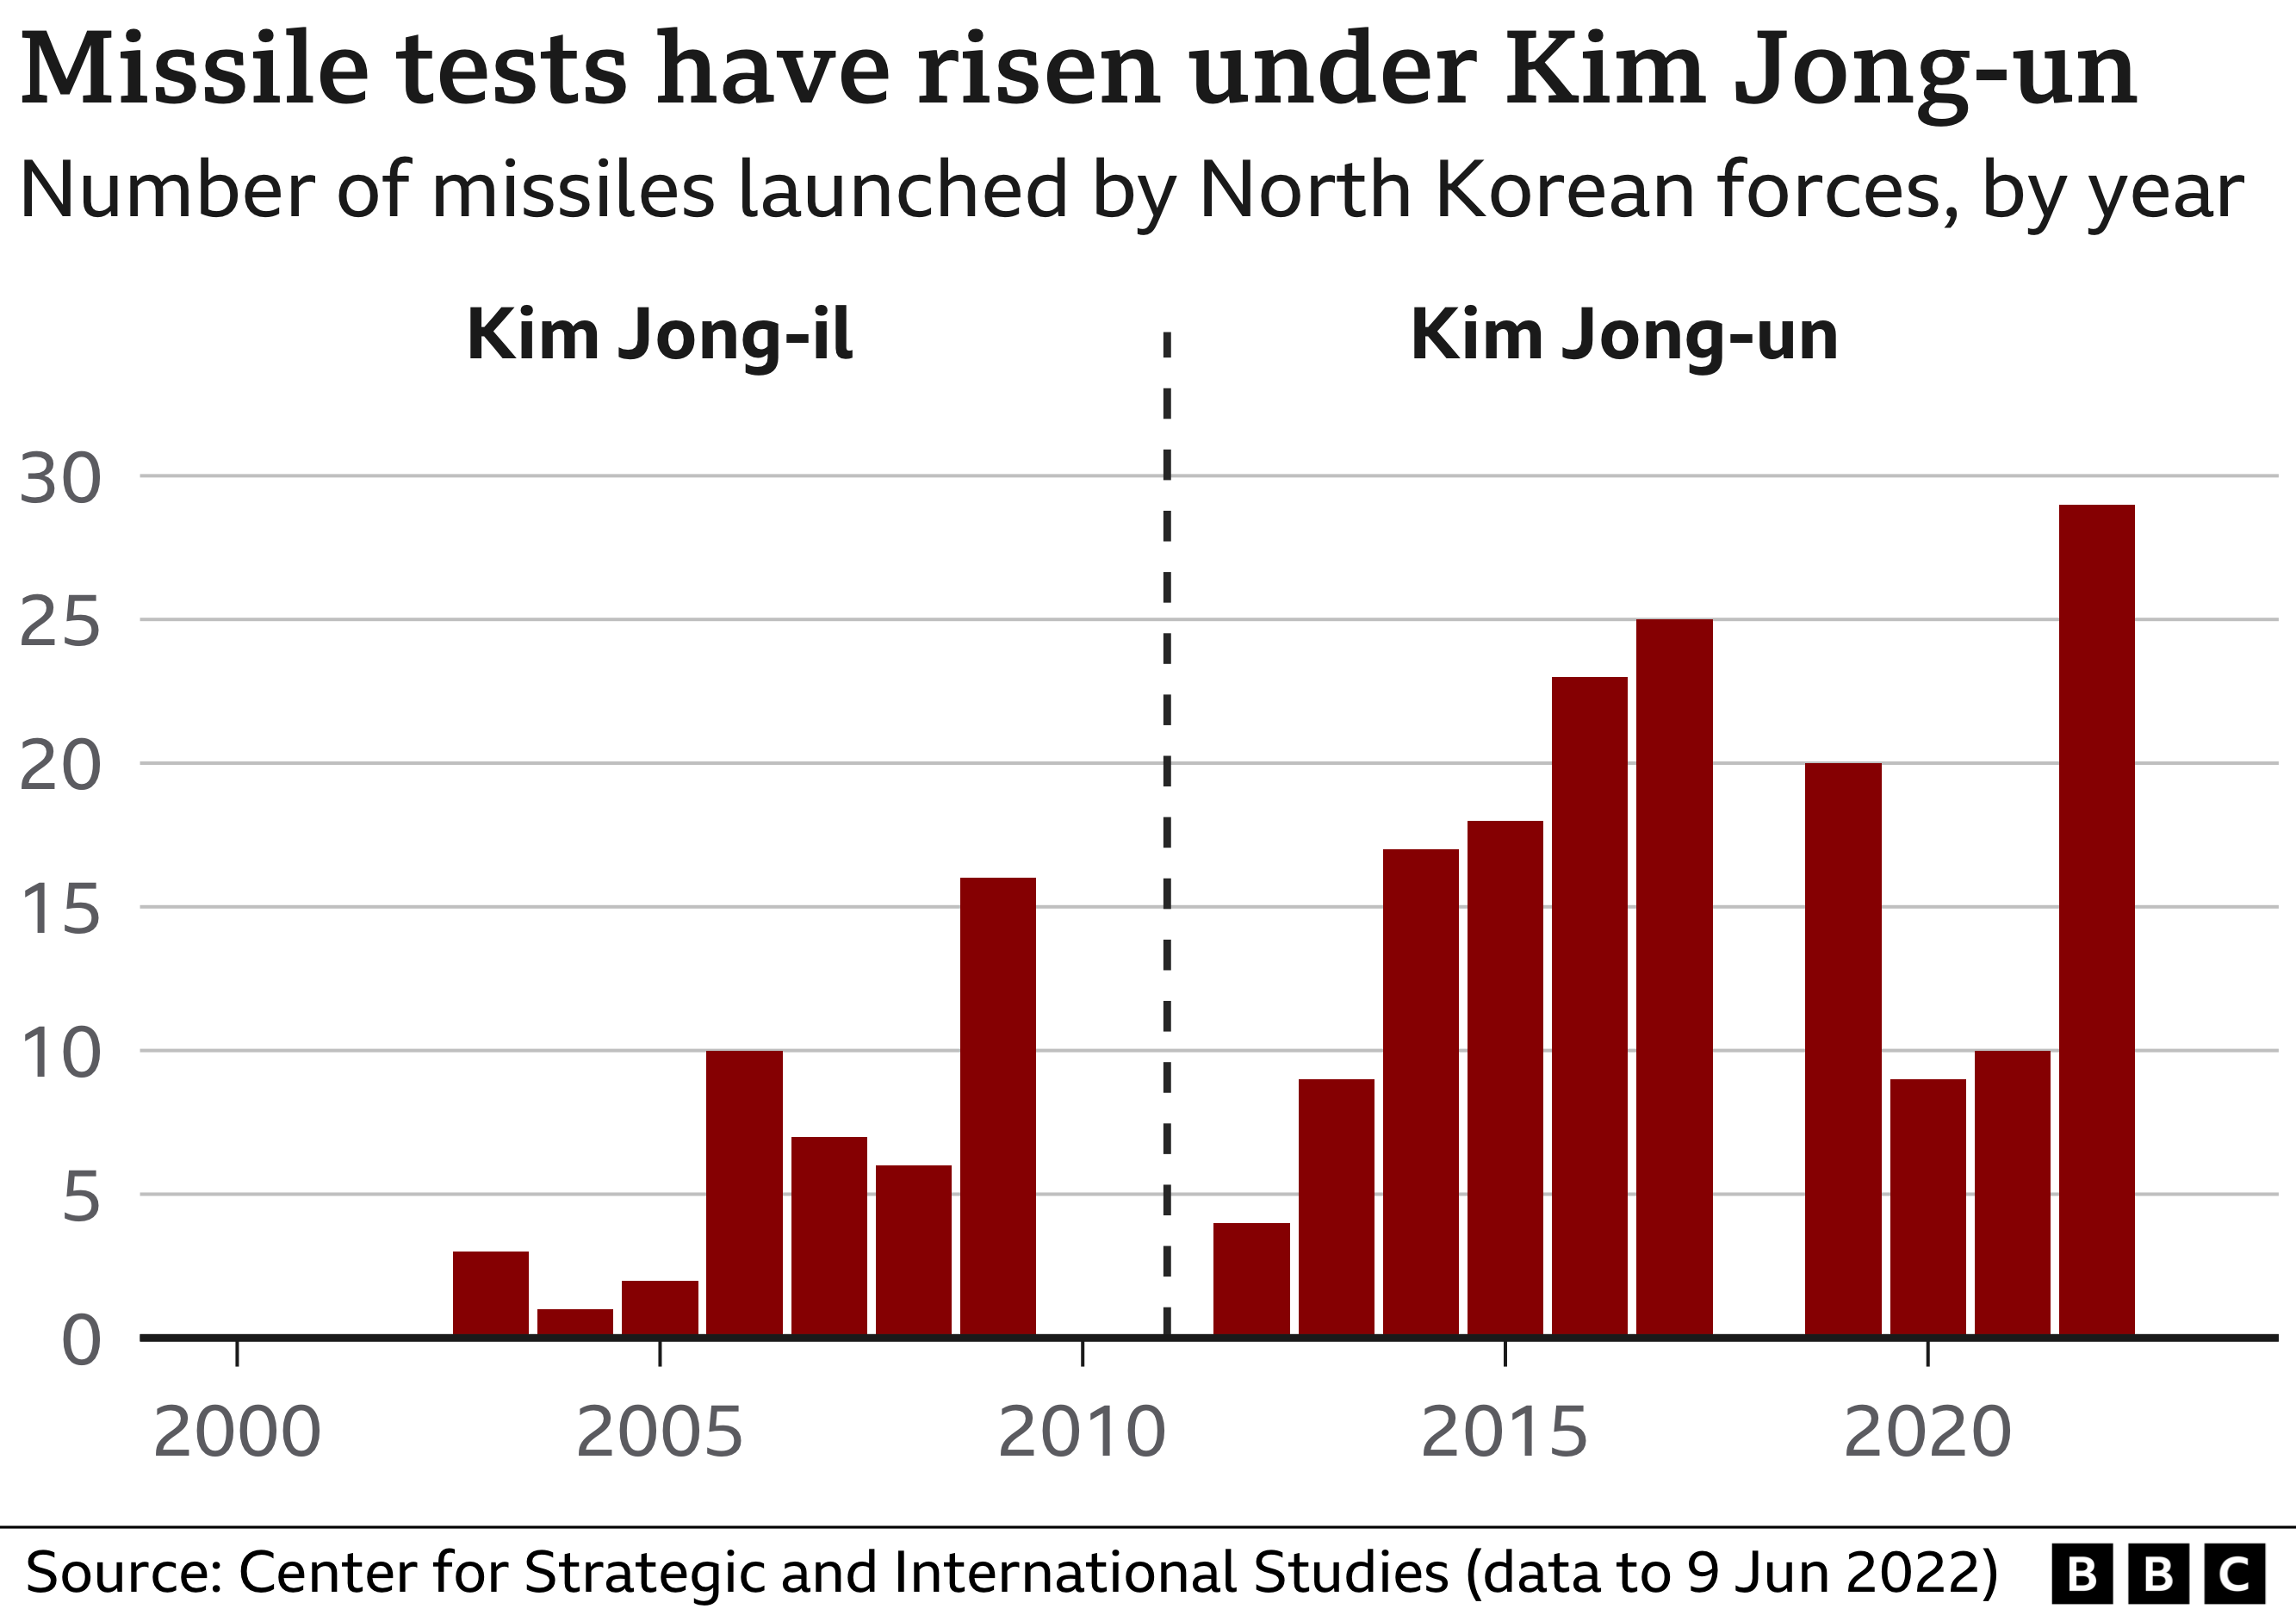 Graph showing the number of missile tests under Kim Jong-un